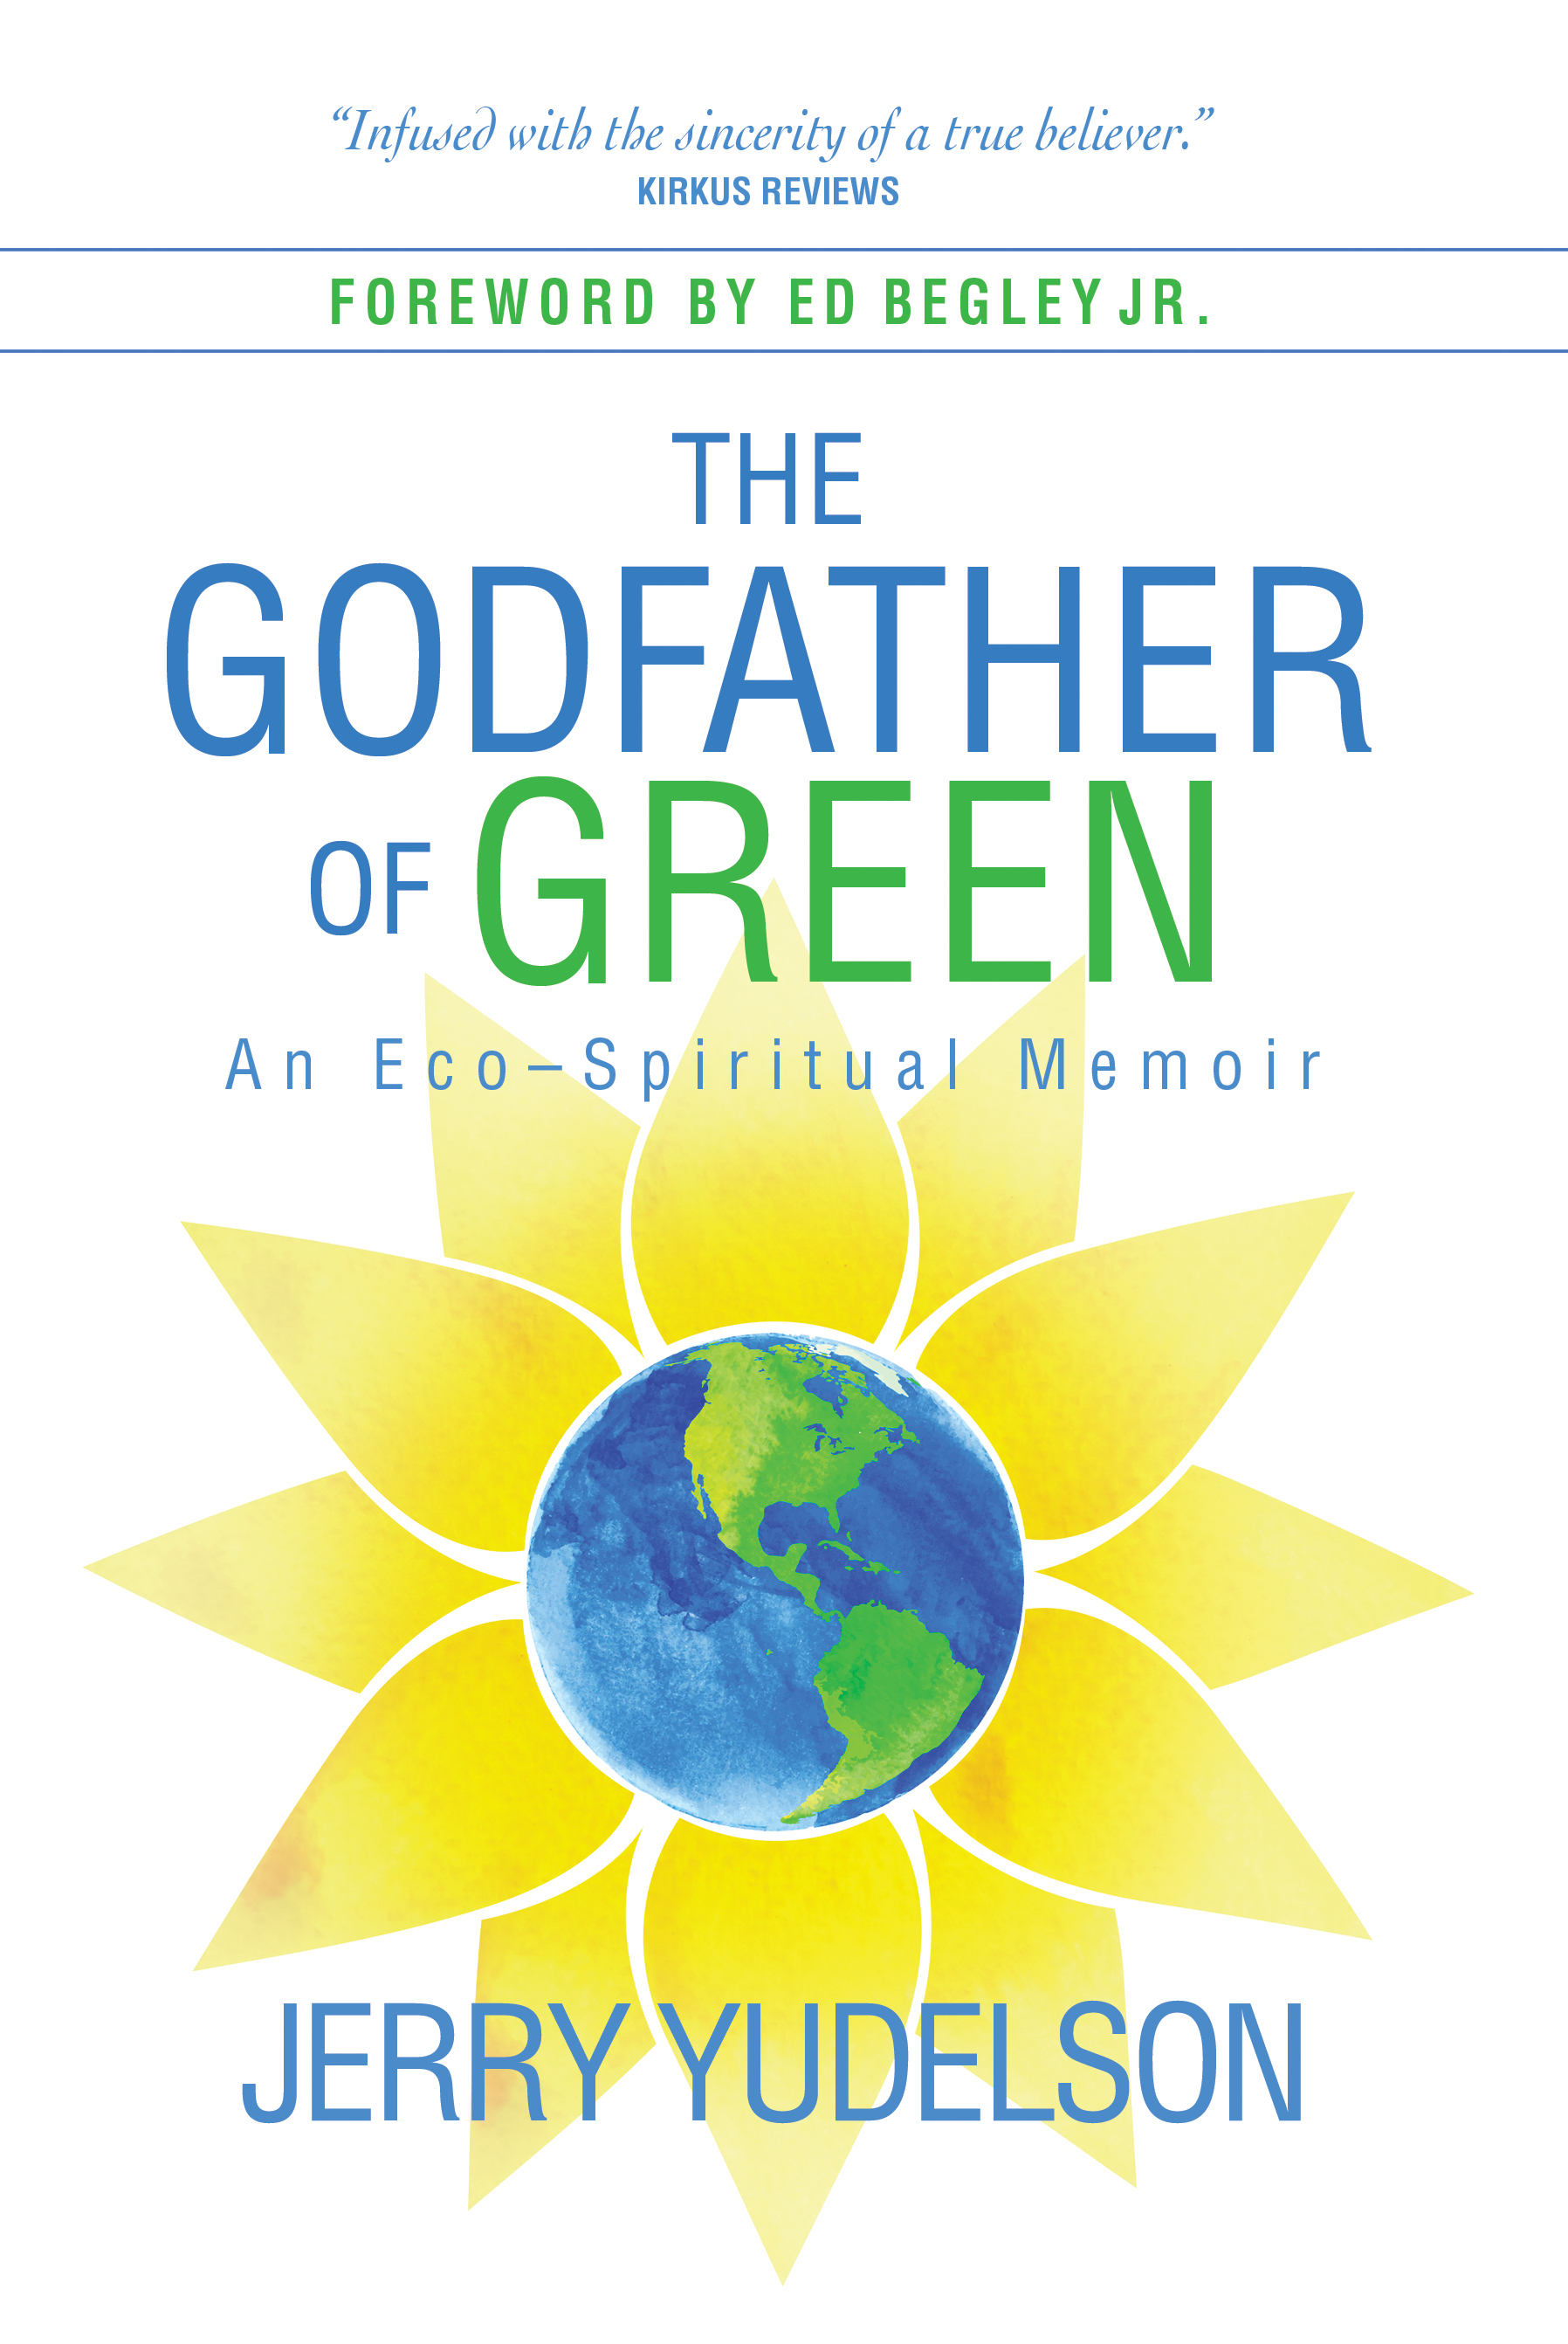 "Godfather of Green" by Jerry Yudelson